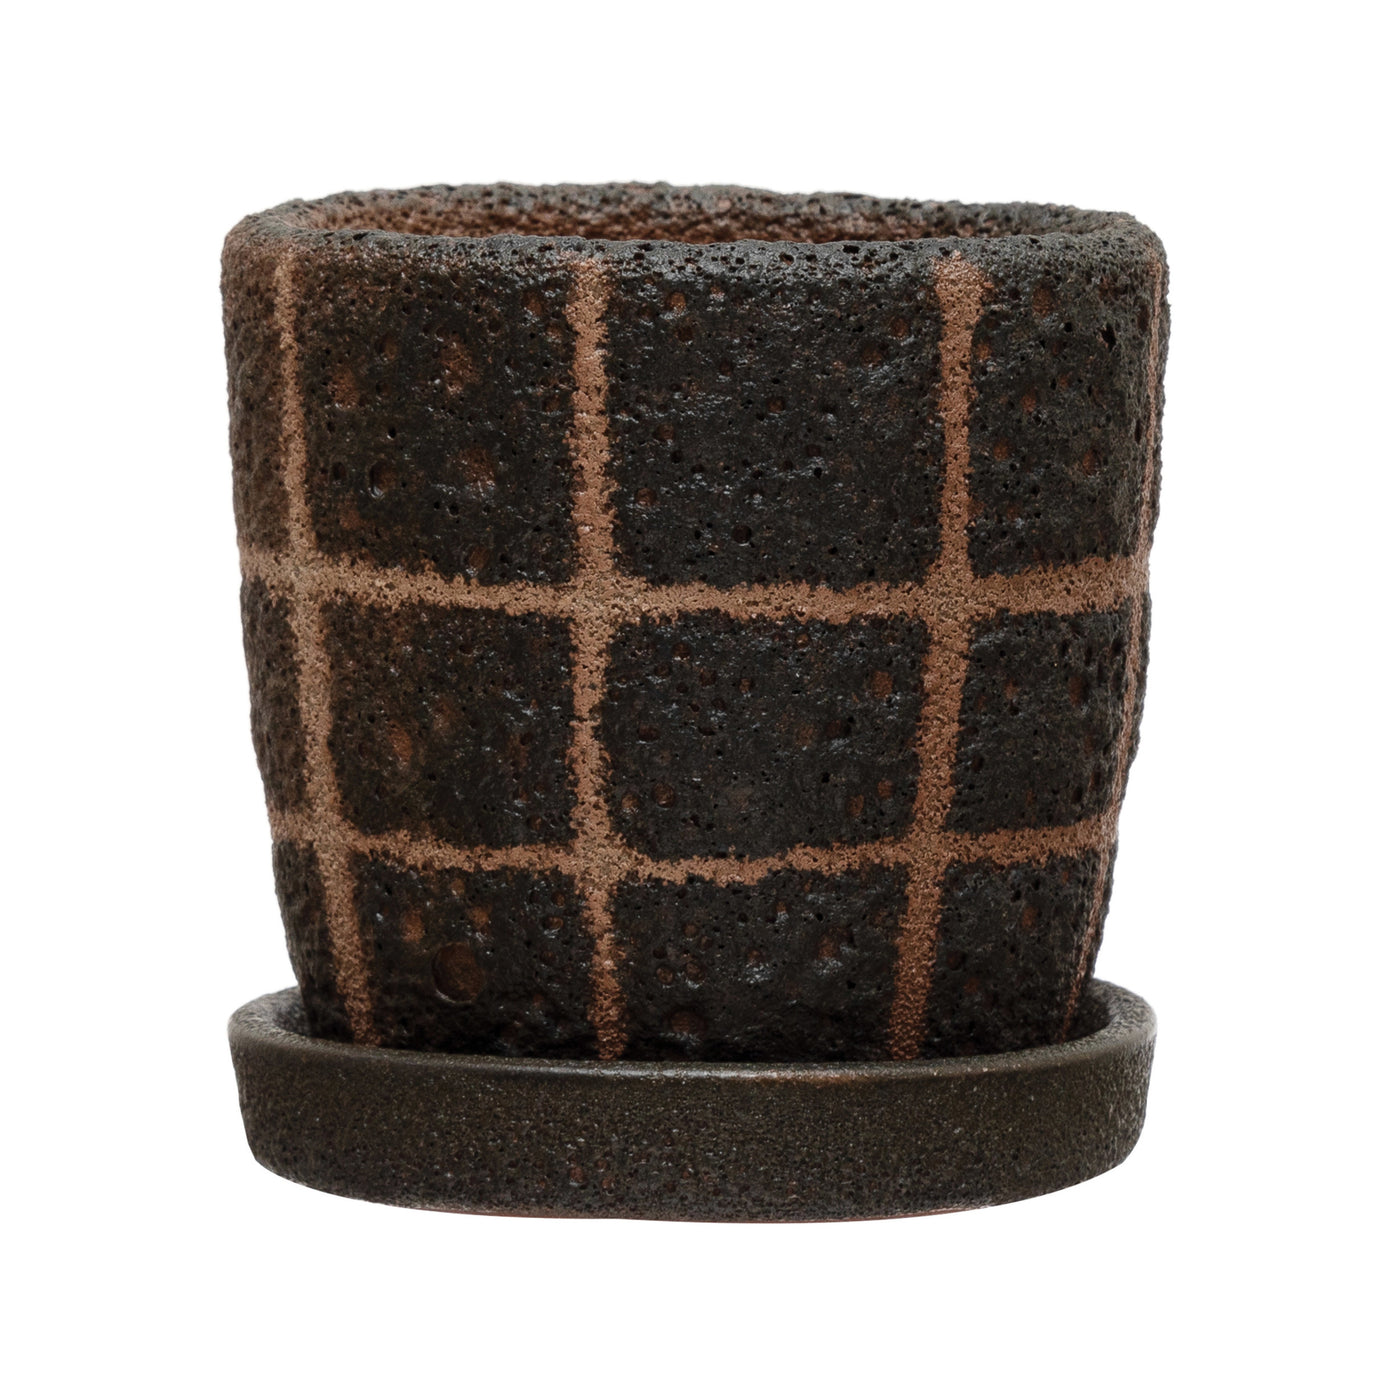 Black Grid Terracotta Planter with Saucer